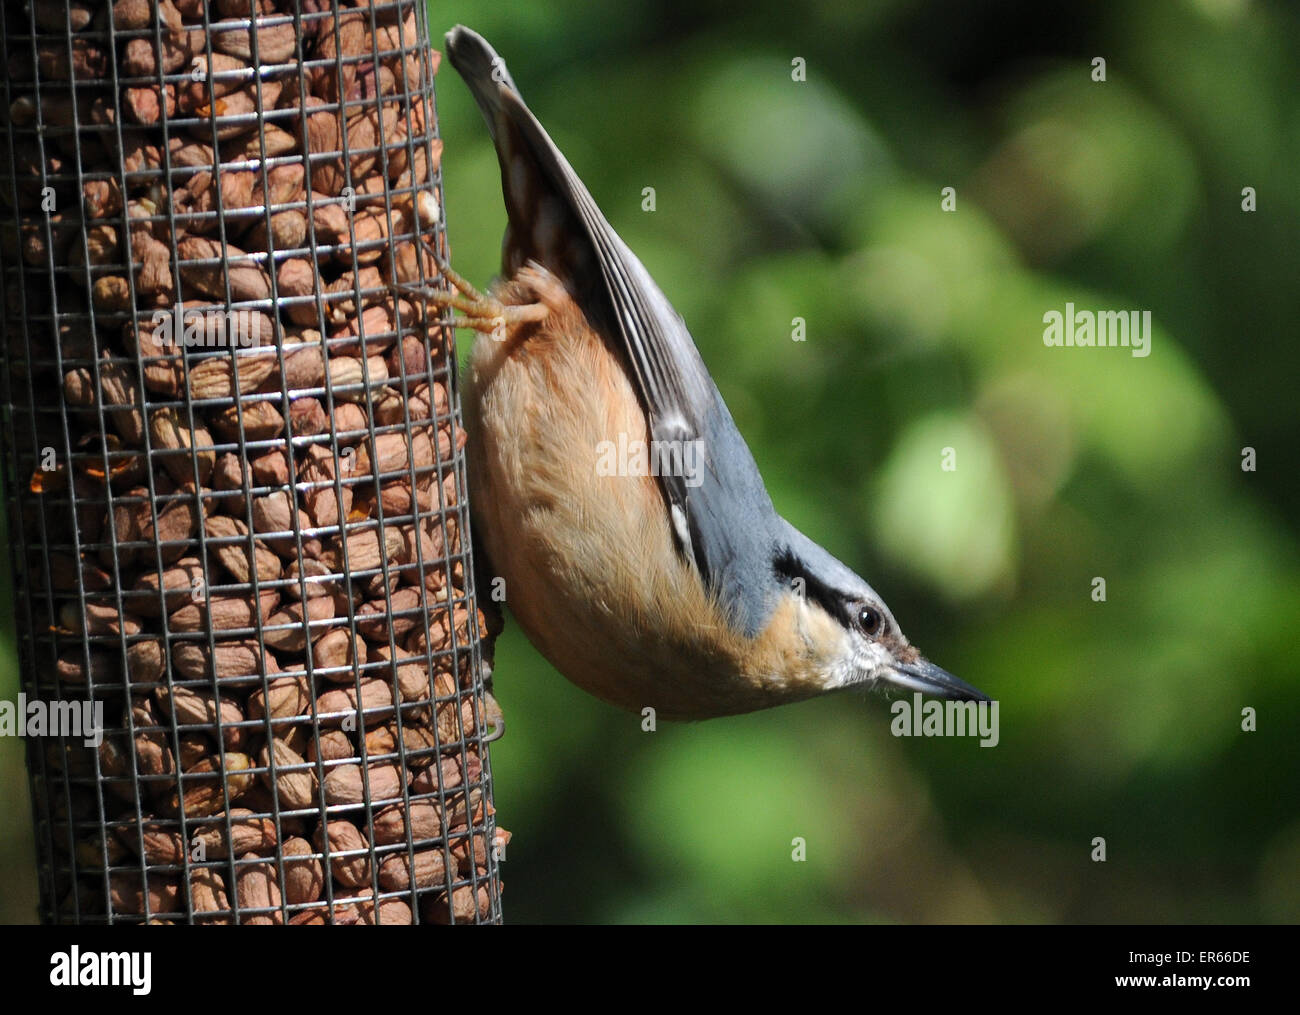 May 2015. A Nuthatch, Sitta europaea,  on a peanut feeder at Arundel, West Sussex. Stock Photo